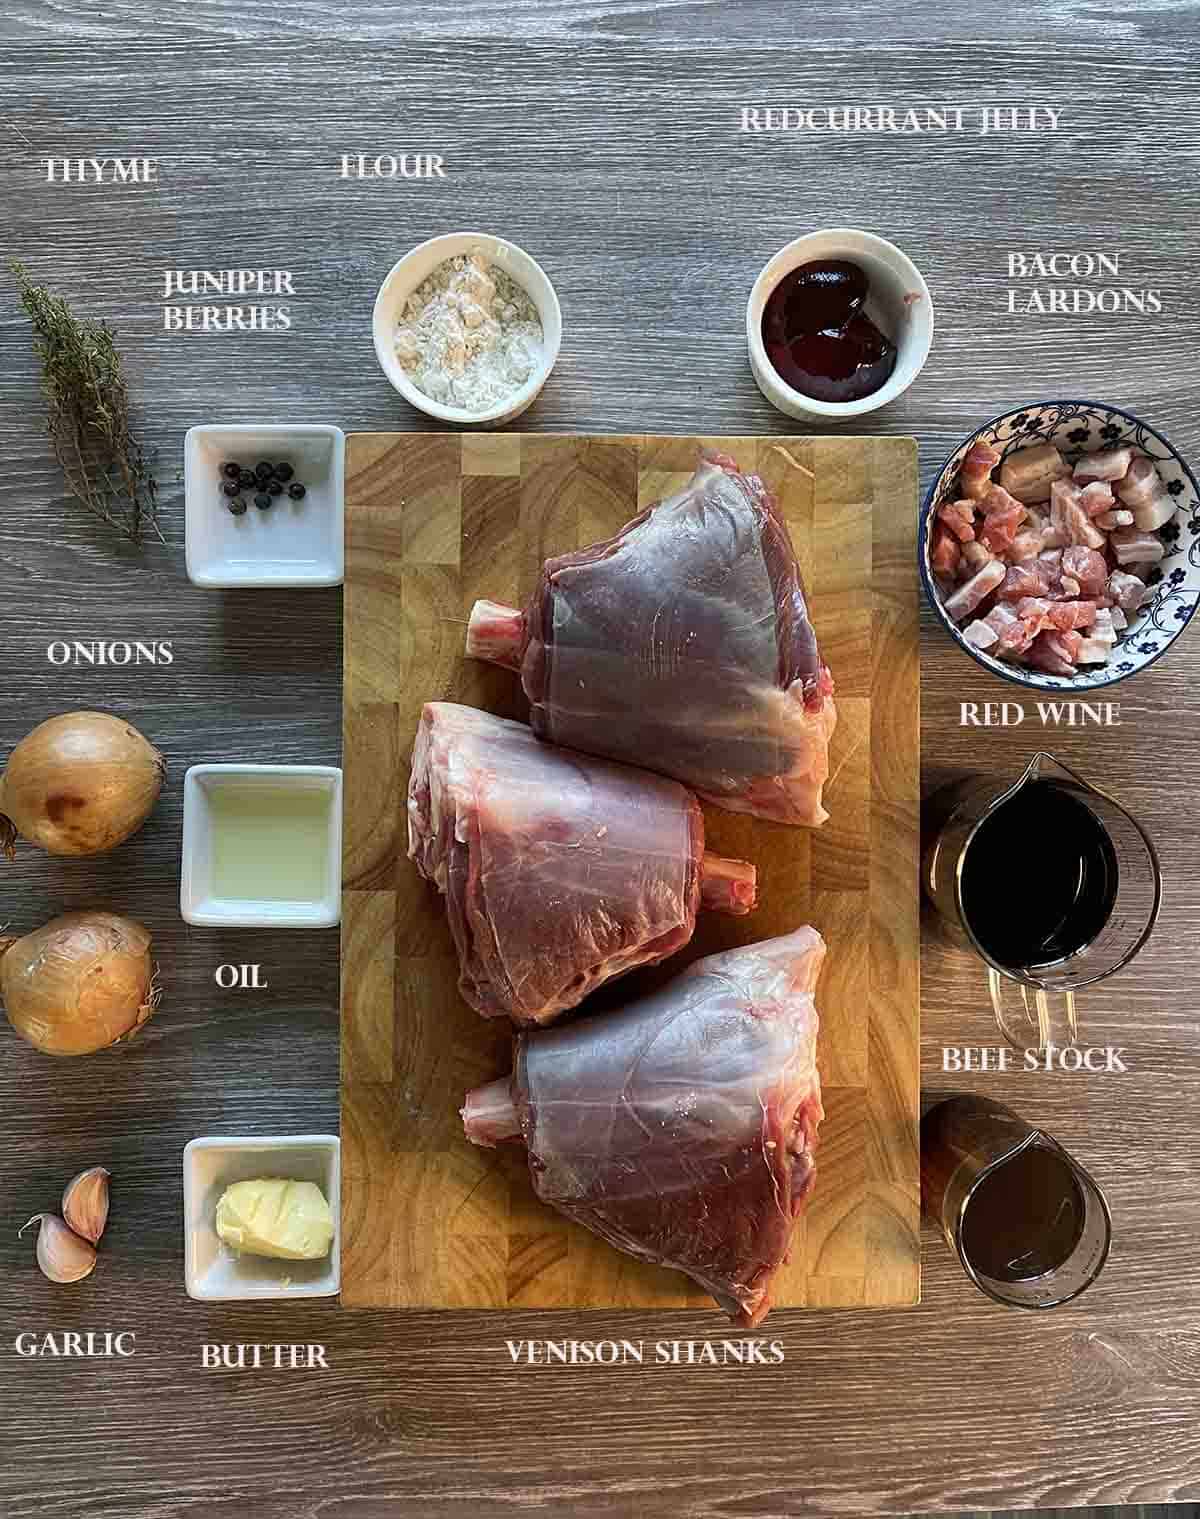 ingredients, including venison shanks, red wine, onions and stock.